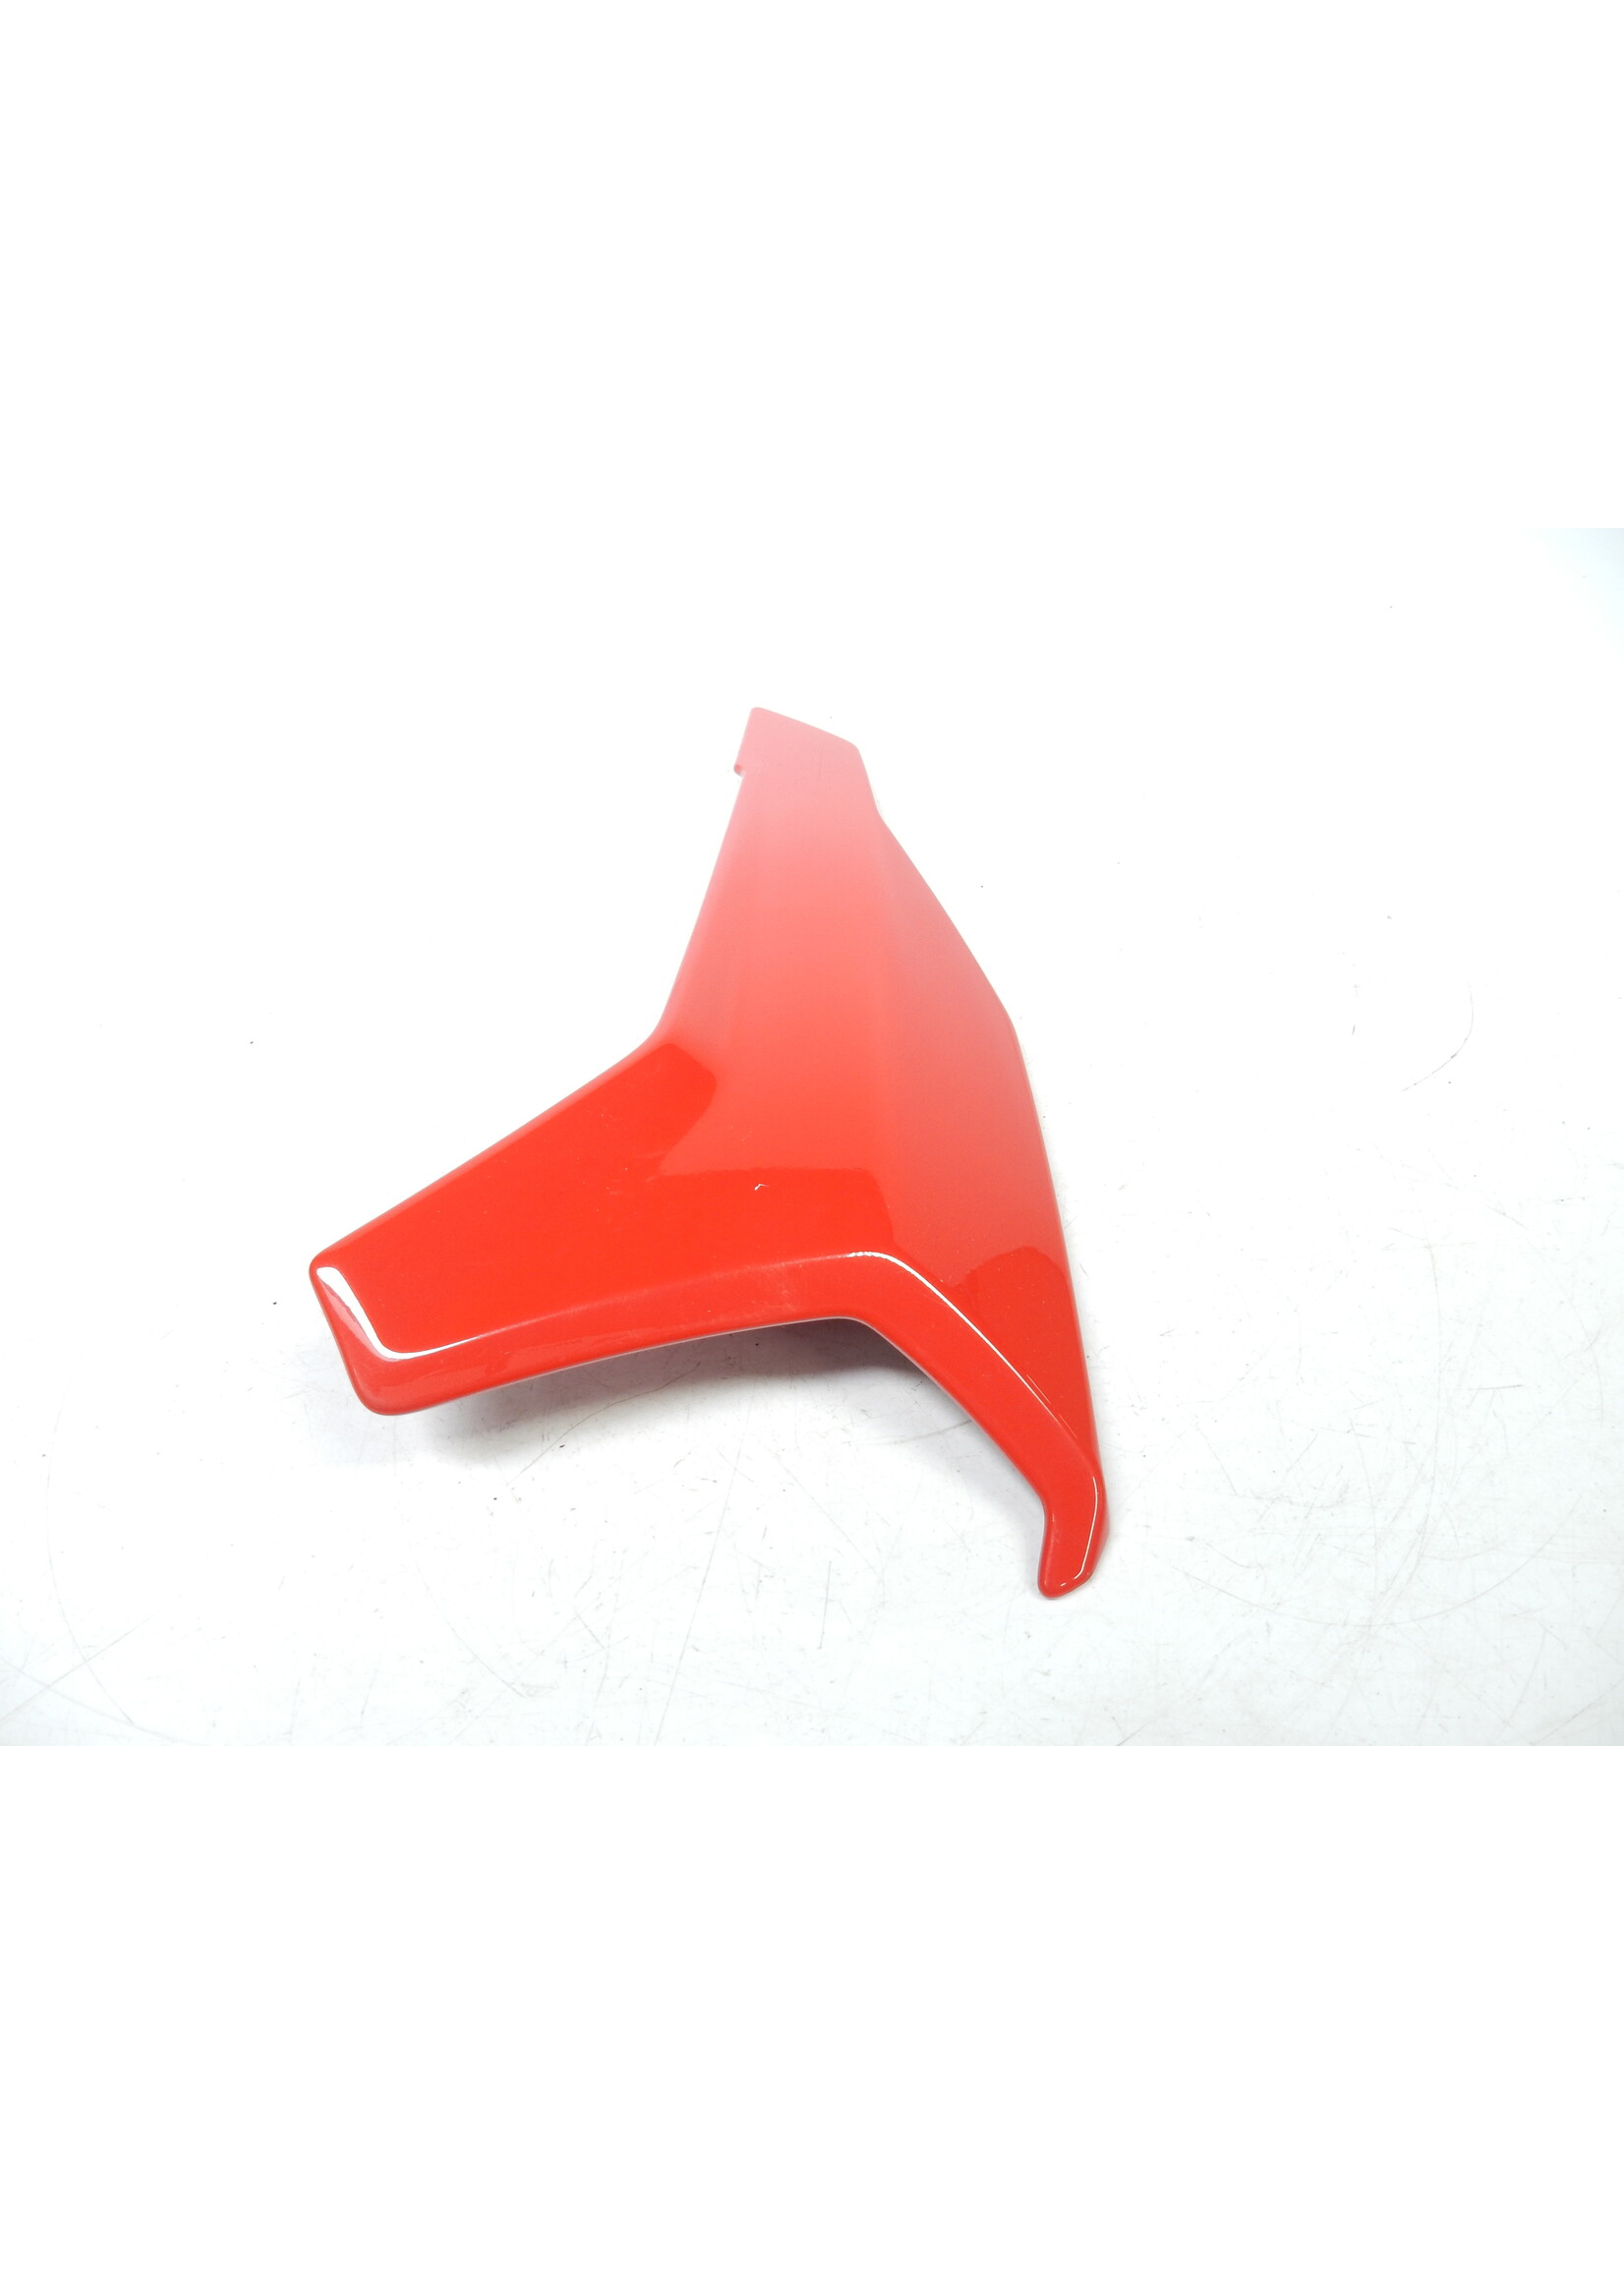 BMW BMW S 1000 R  Rear lateral part, left Racingred uni / 46637923863 / 46639443391